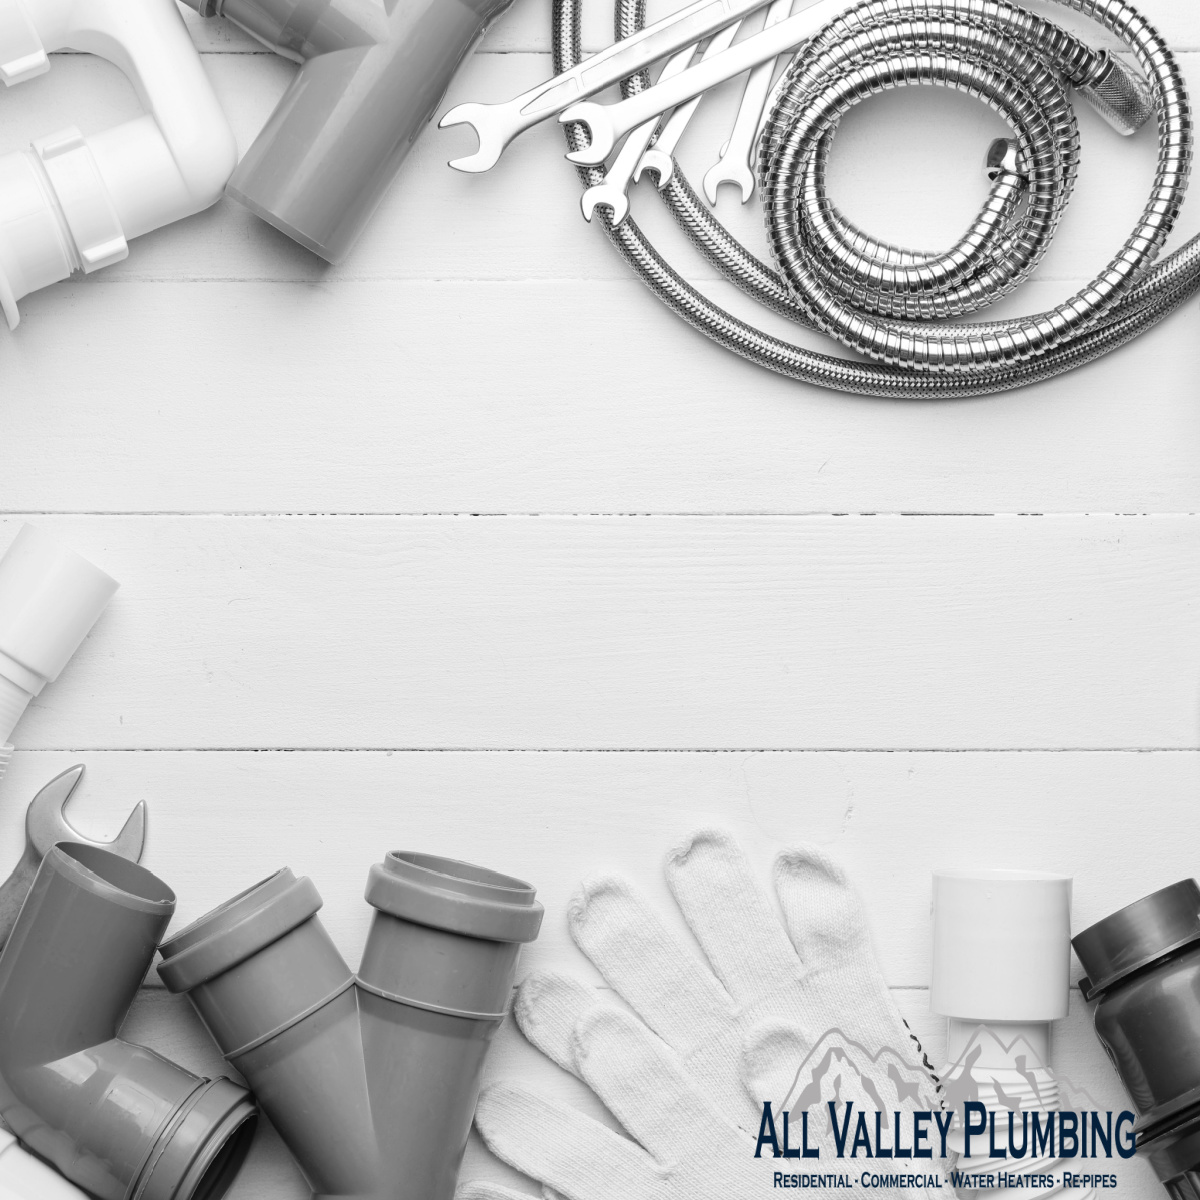 You Can Trust Our Qualified Plumbers - Call Us For Service In Arlington!